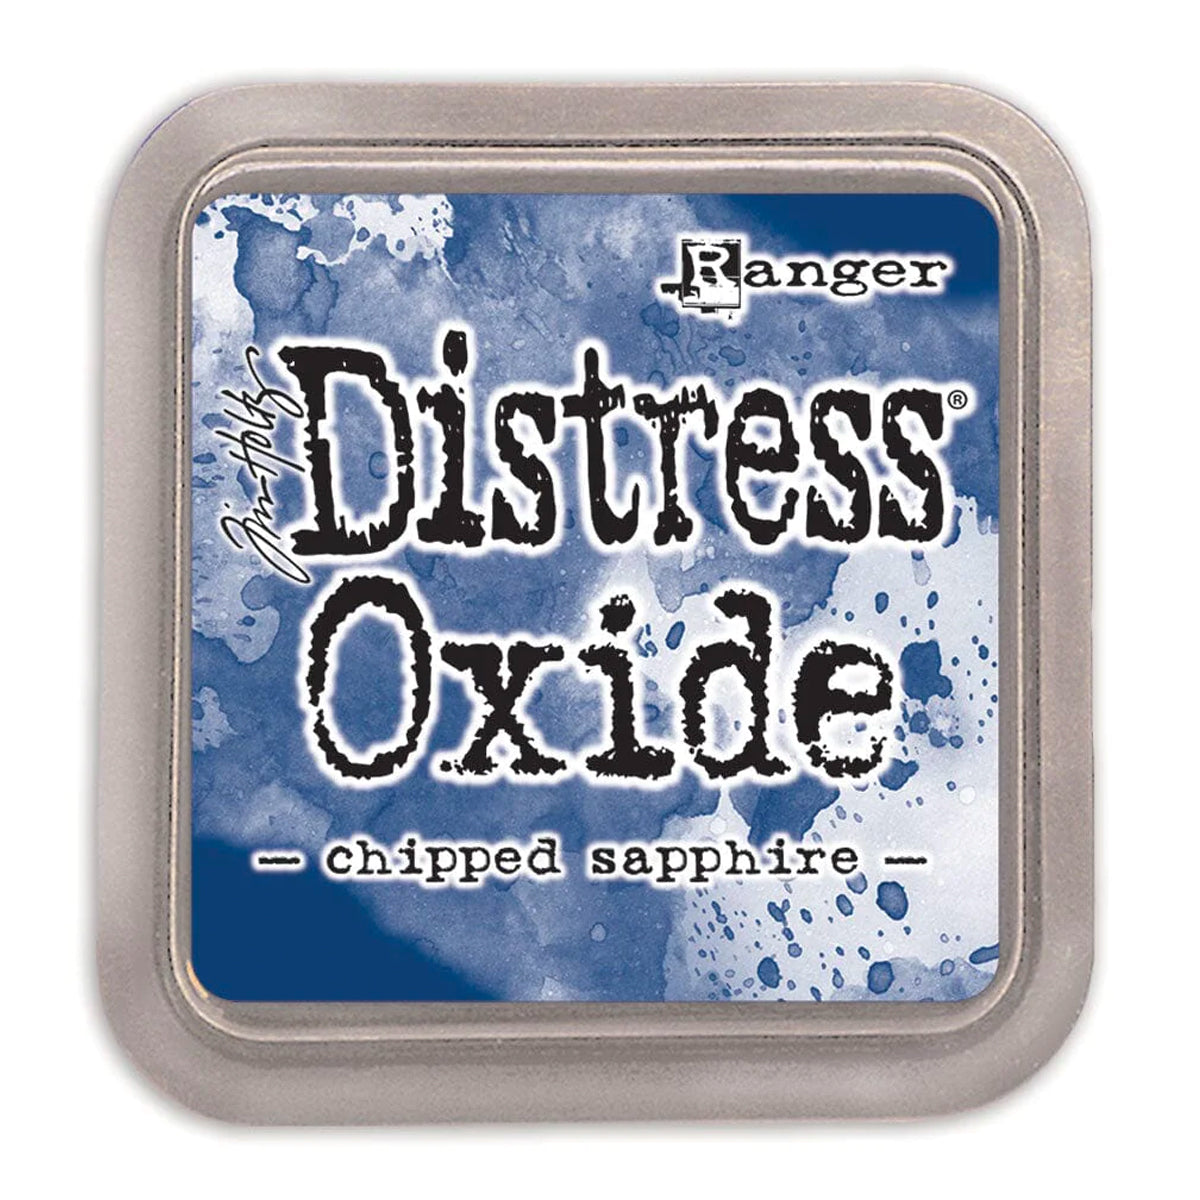 Tim Holtz Distress Oxide Ink Pad - Chipped Sapphire